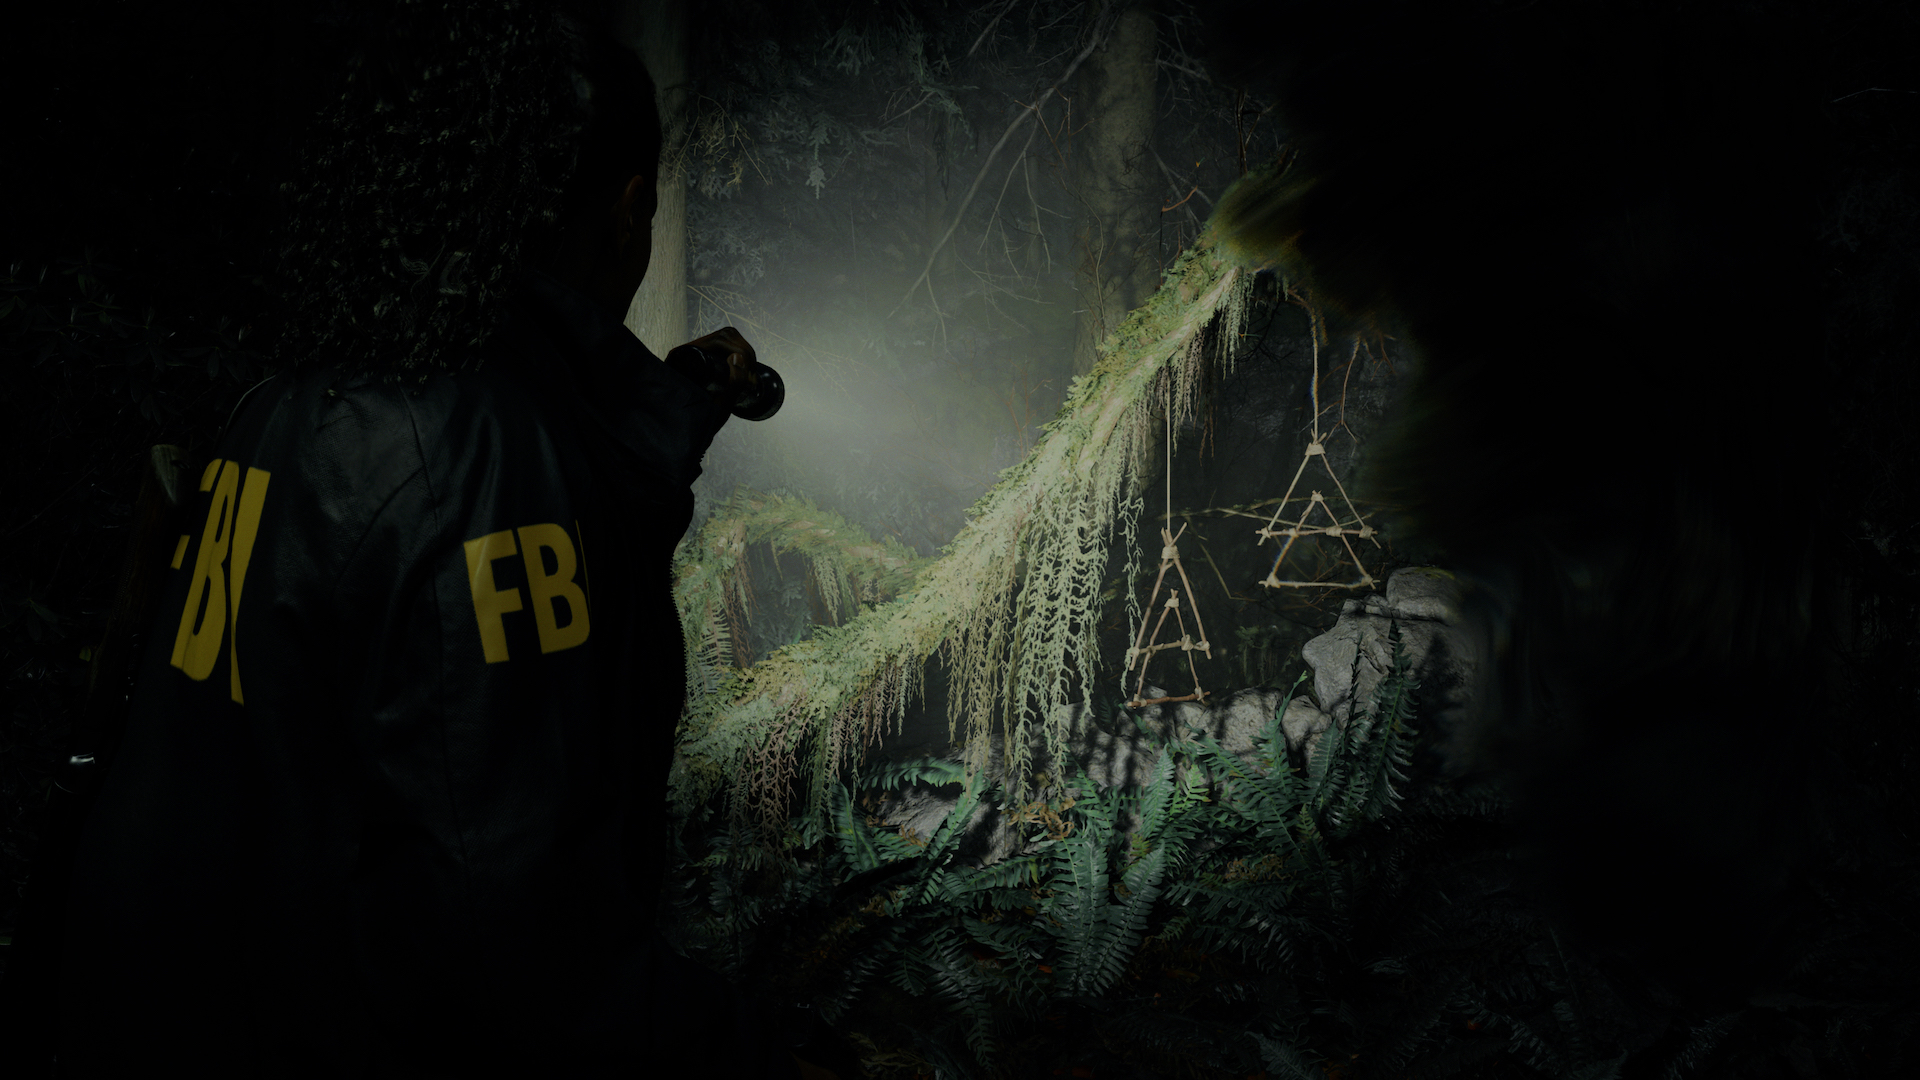 An FBI agent shines a torch over ritualistic items left in a woodland setting